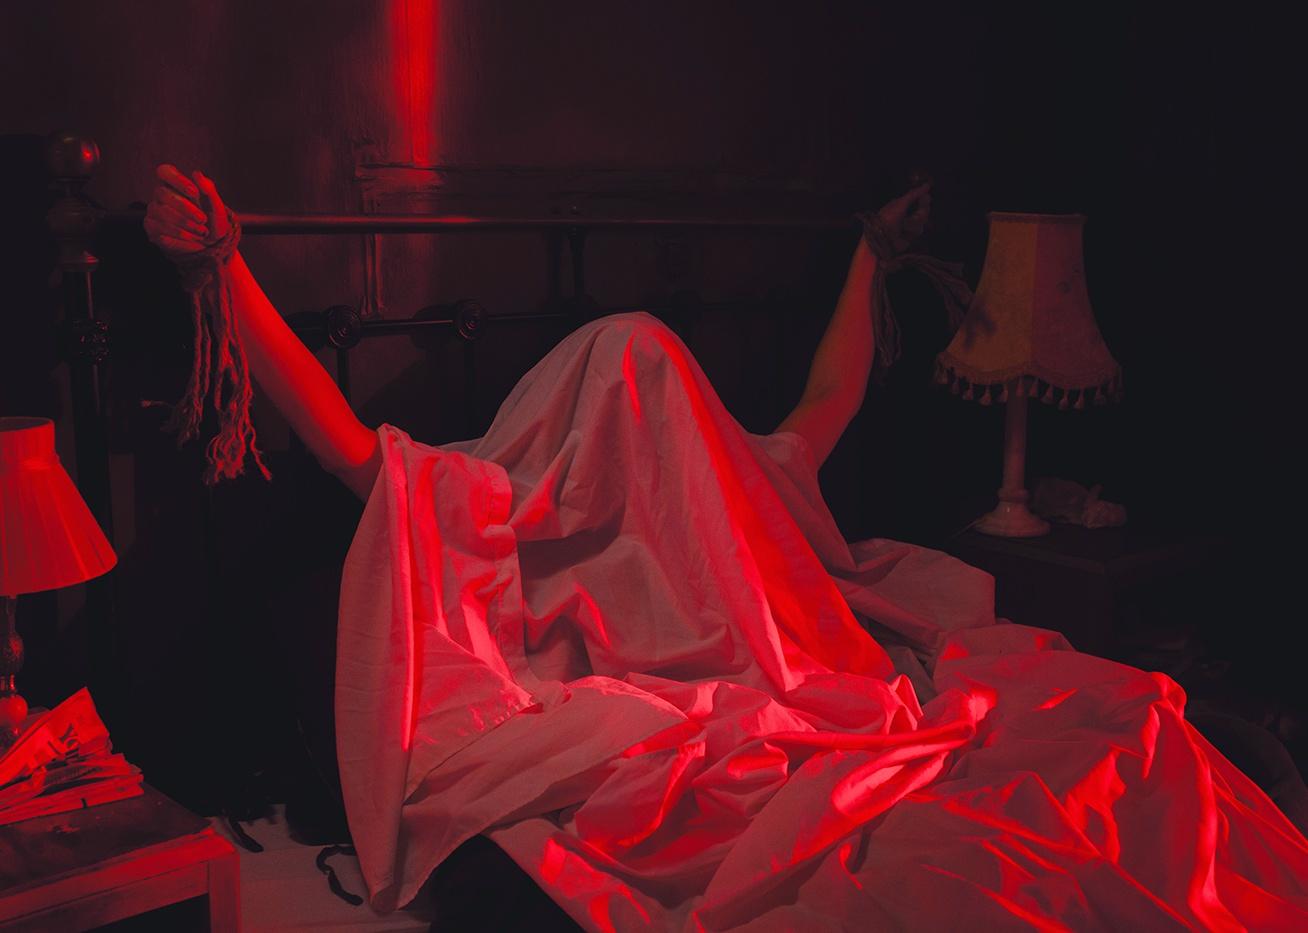 A person under a sheet tied to a bed in a red light